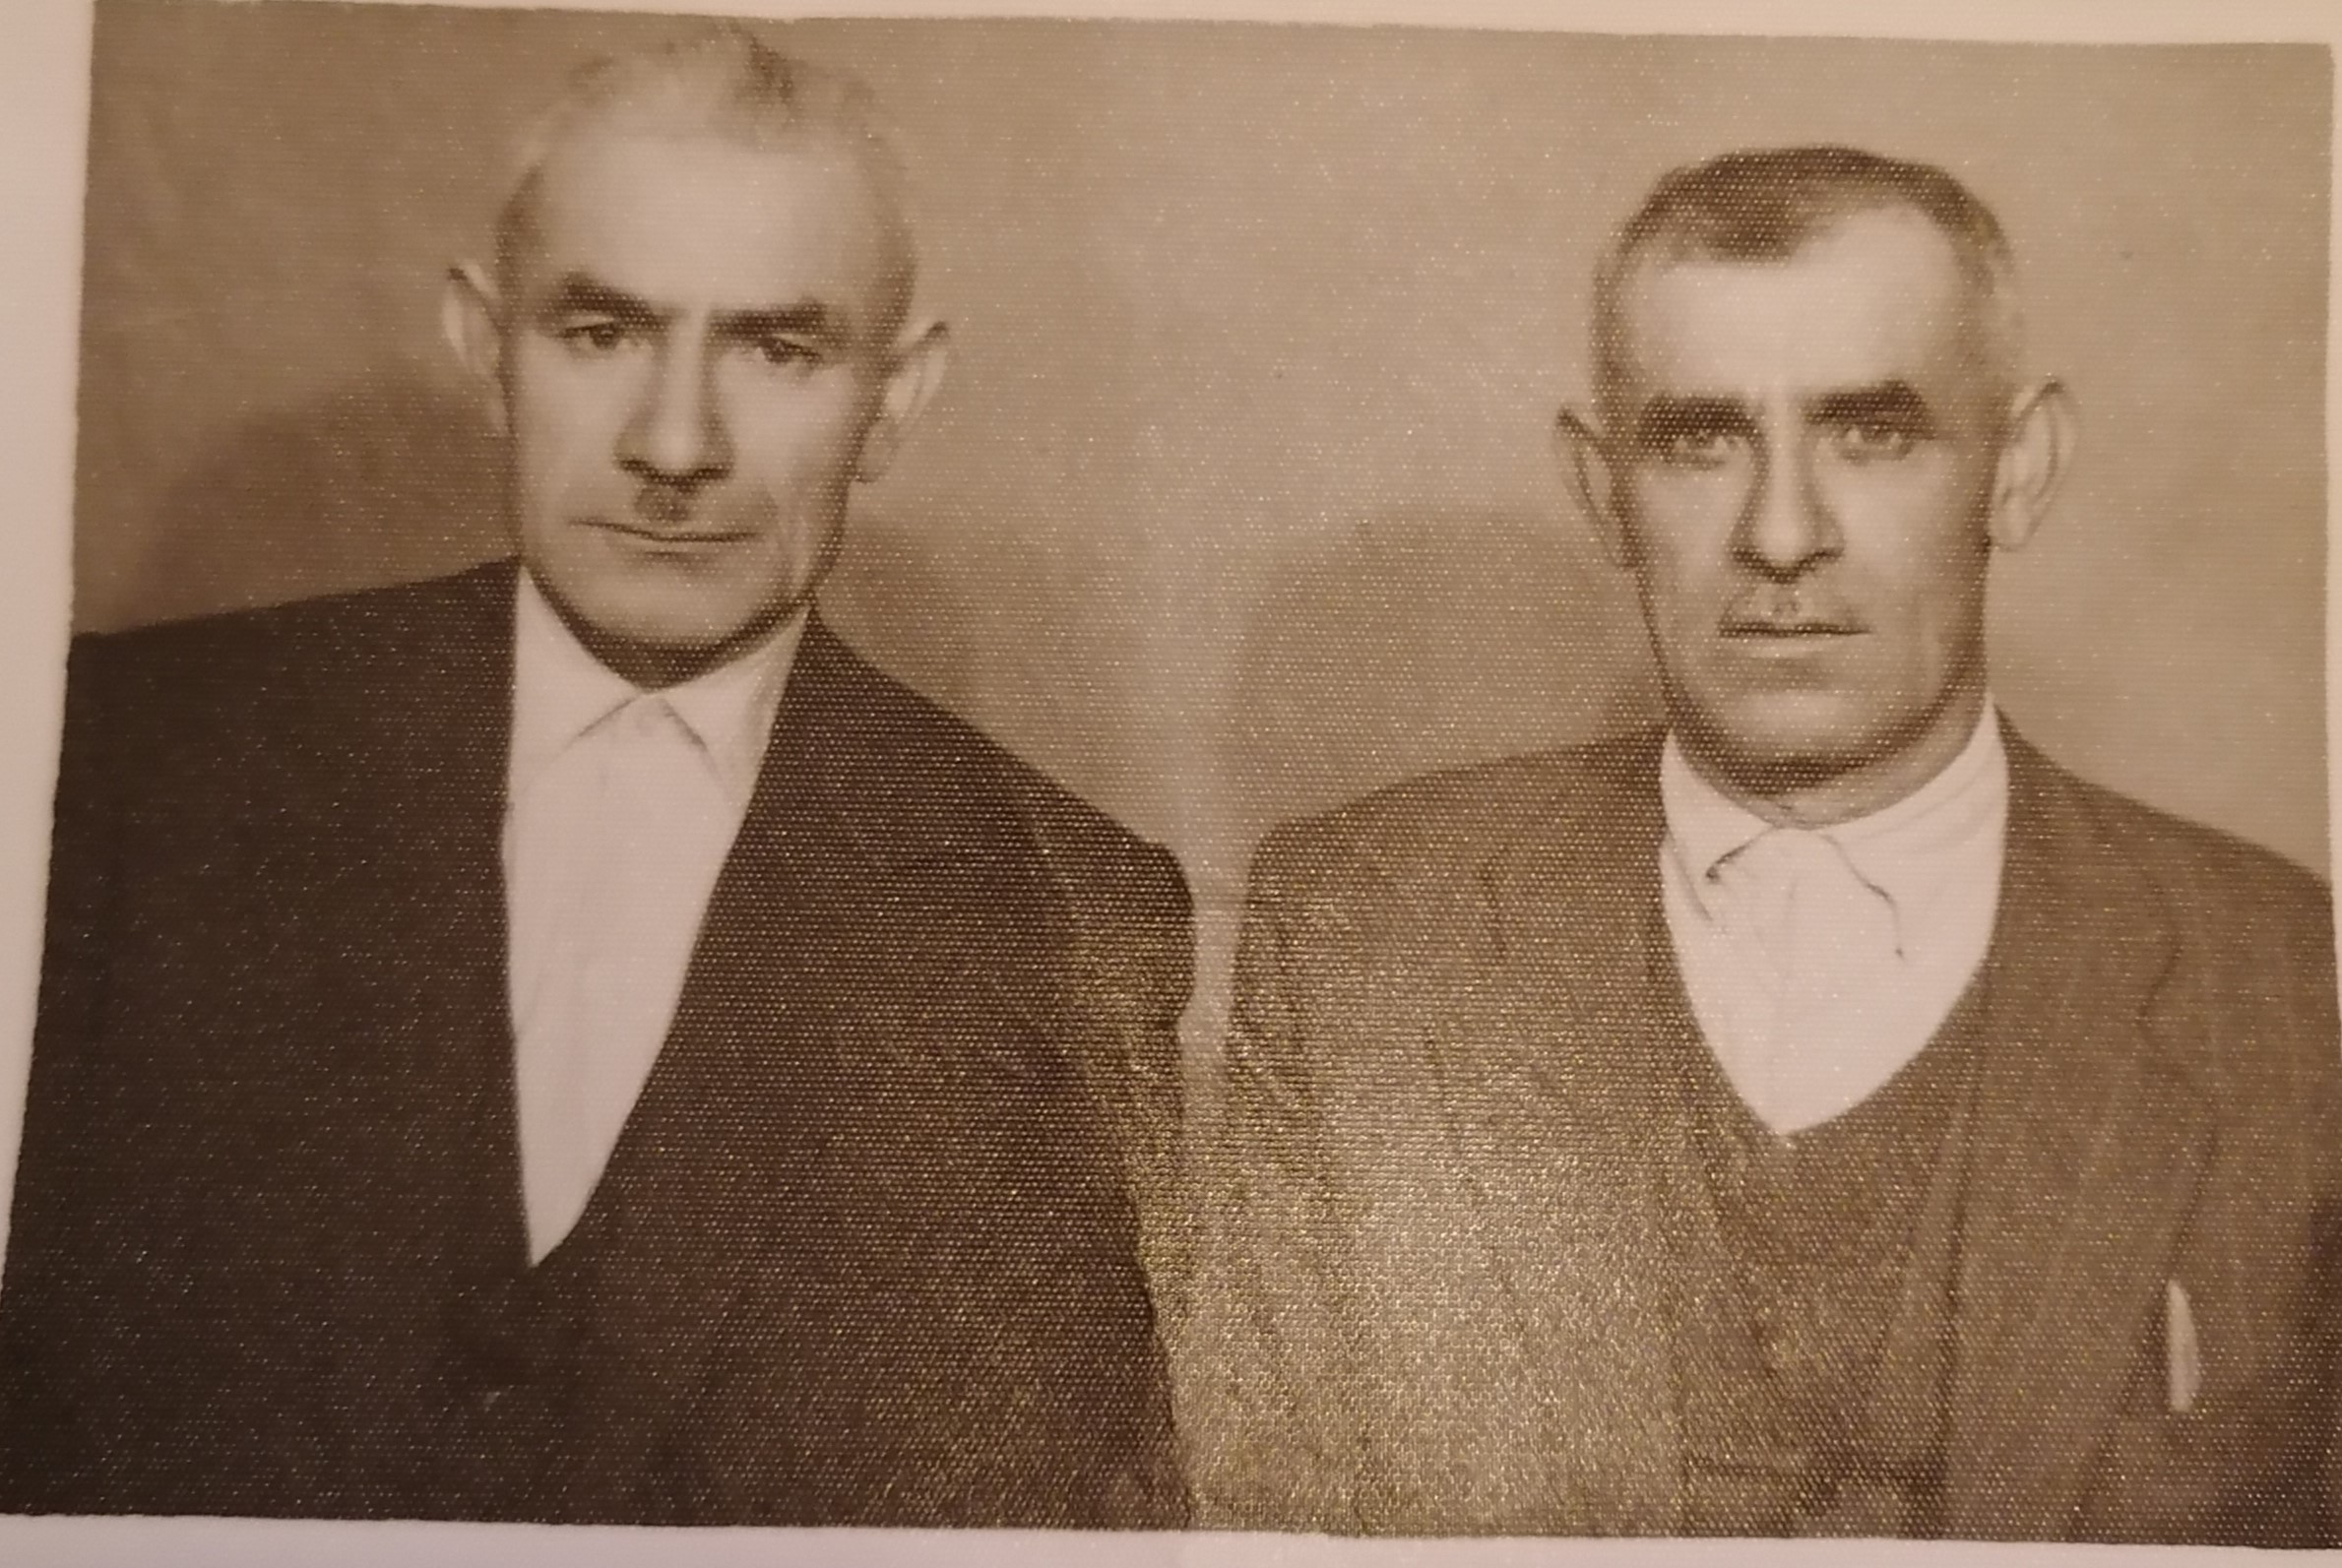 Mert Kaya's great-grandfather and his brother: On the left, Ioannis Anastasiadis and on the right, the author's great-grandfather, hakshak Terece, in their first and last photo together, in Bitlis, in the '60s. «Πηγή: https://www.athensvoice.gr/greece/713246_mert-kaya-den-distazo-na-po-eimai-ellinas-pontios»